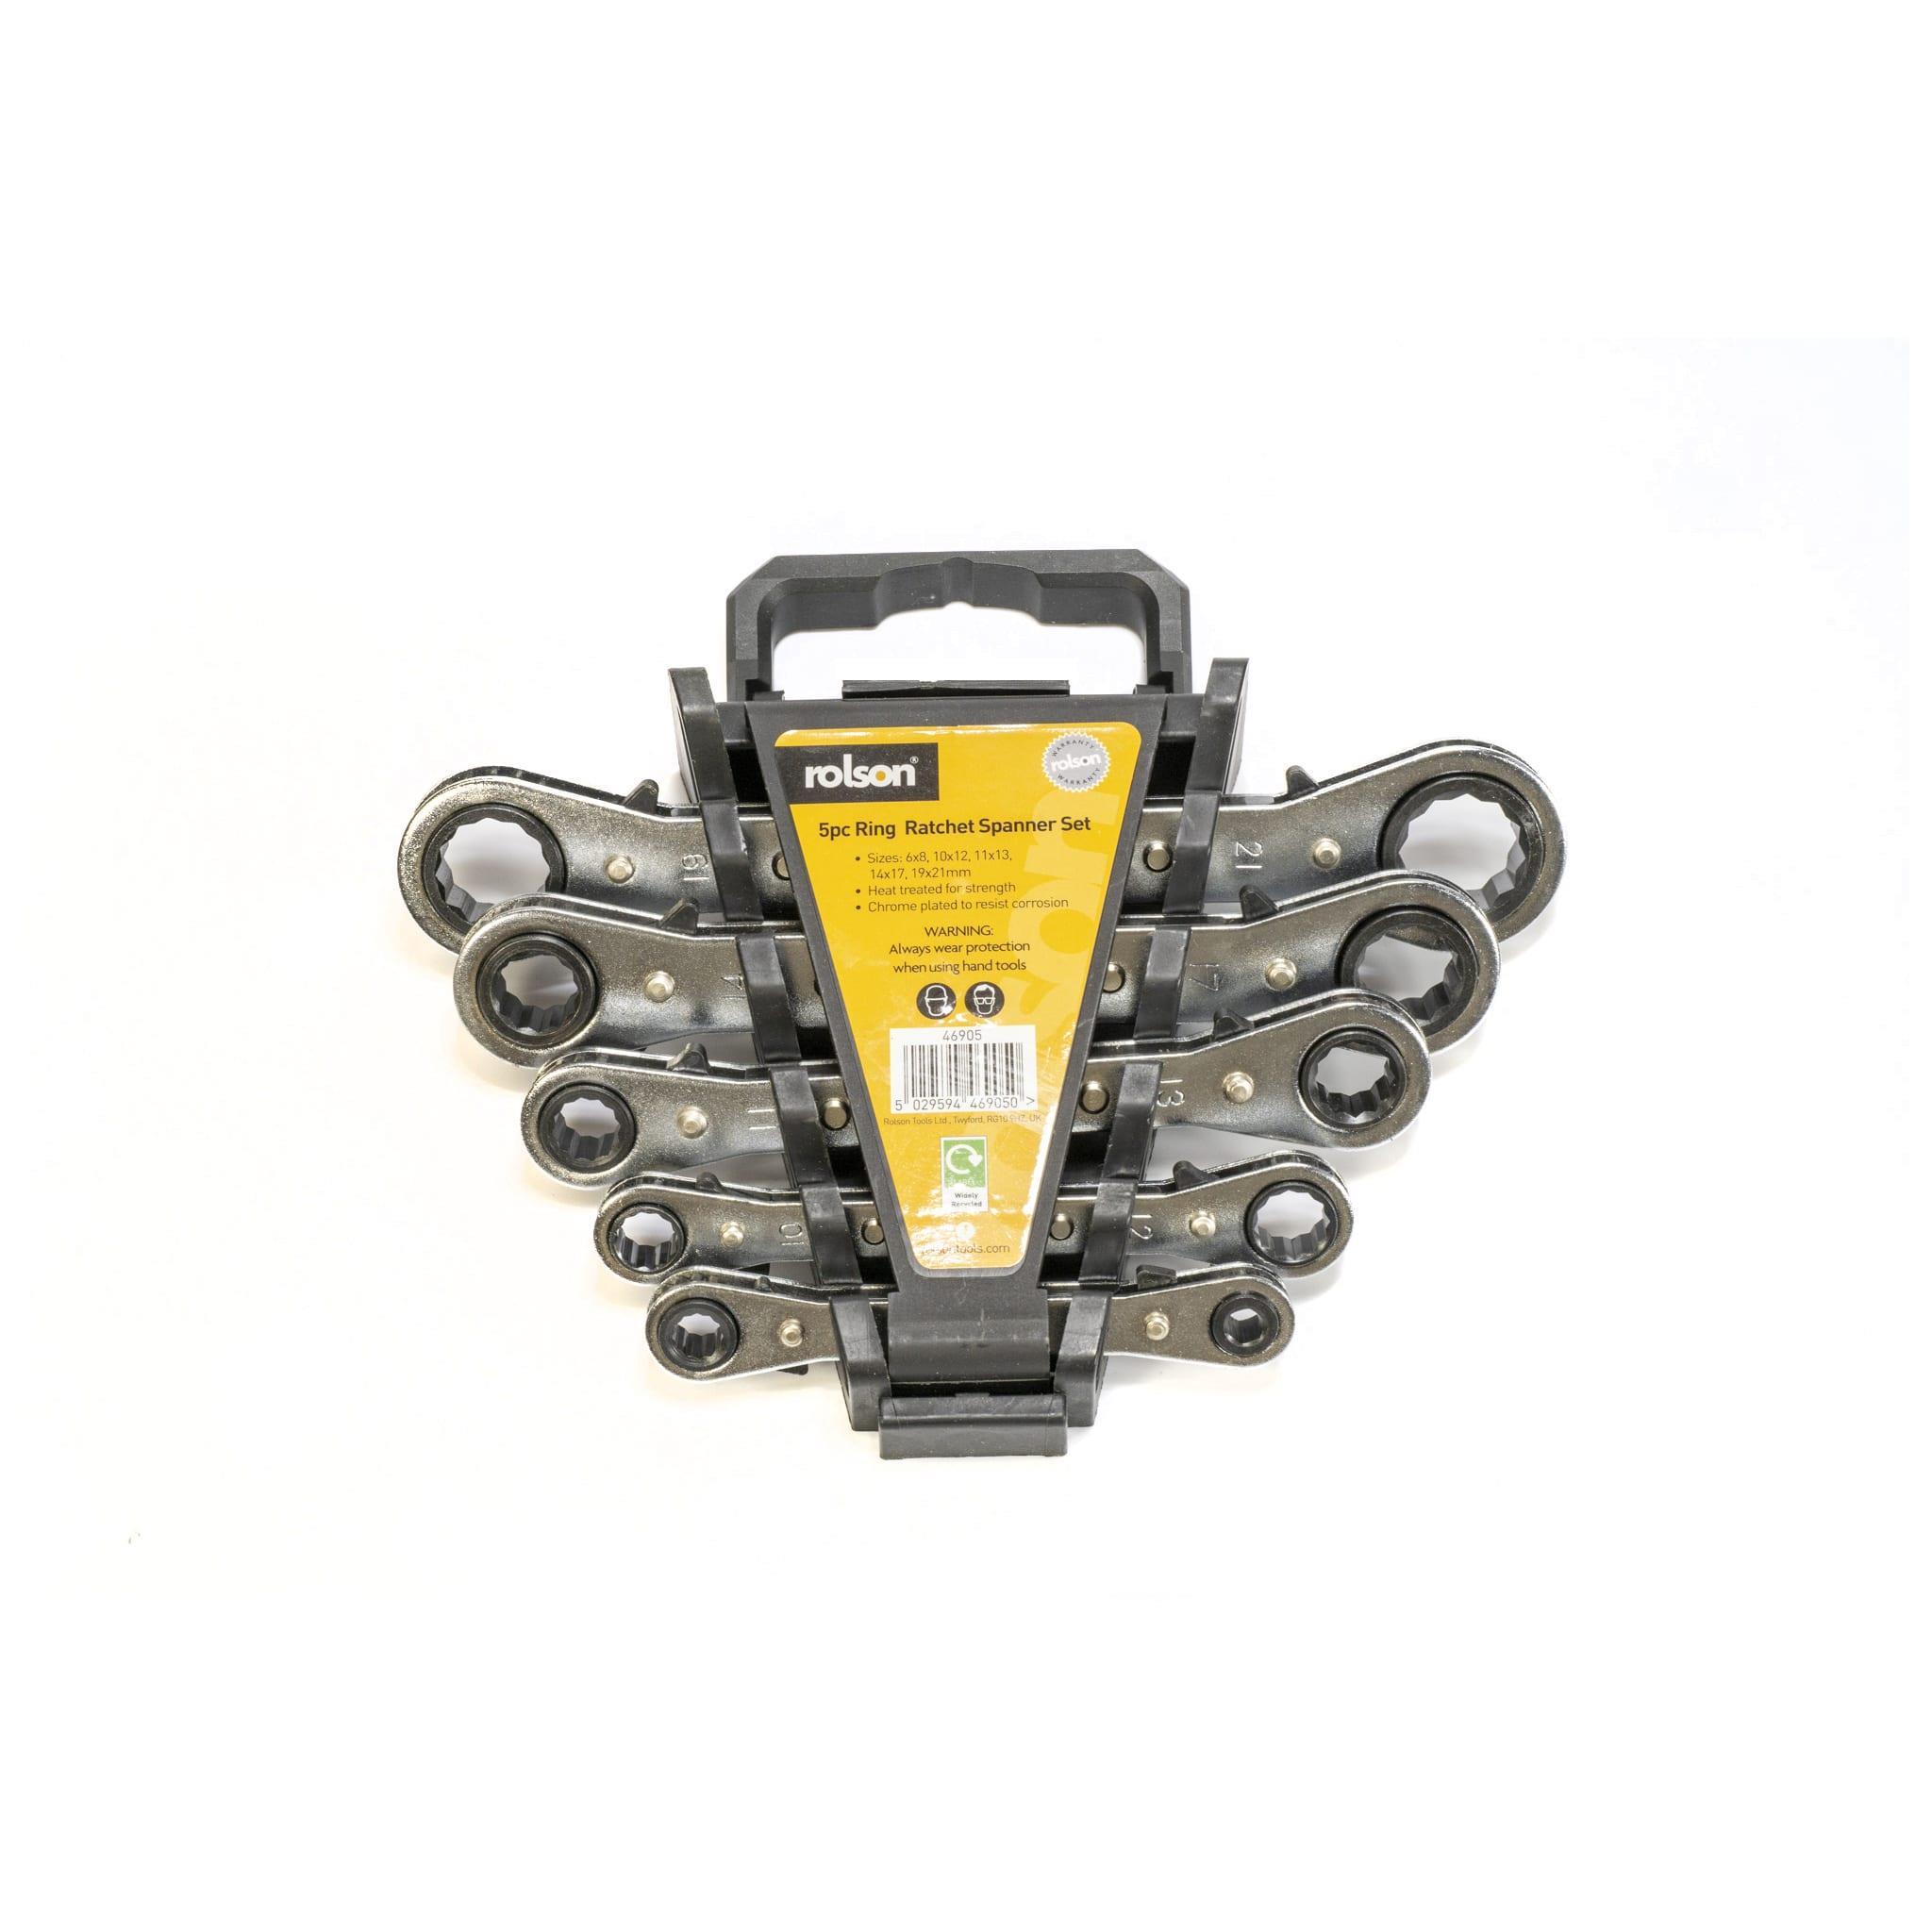 5 Piece Ratchet Ring Spanners